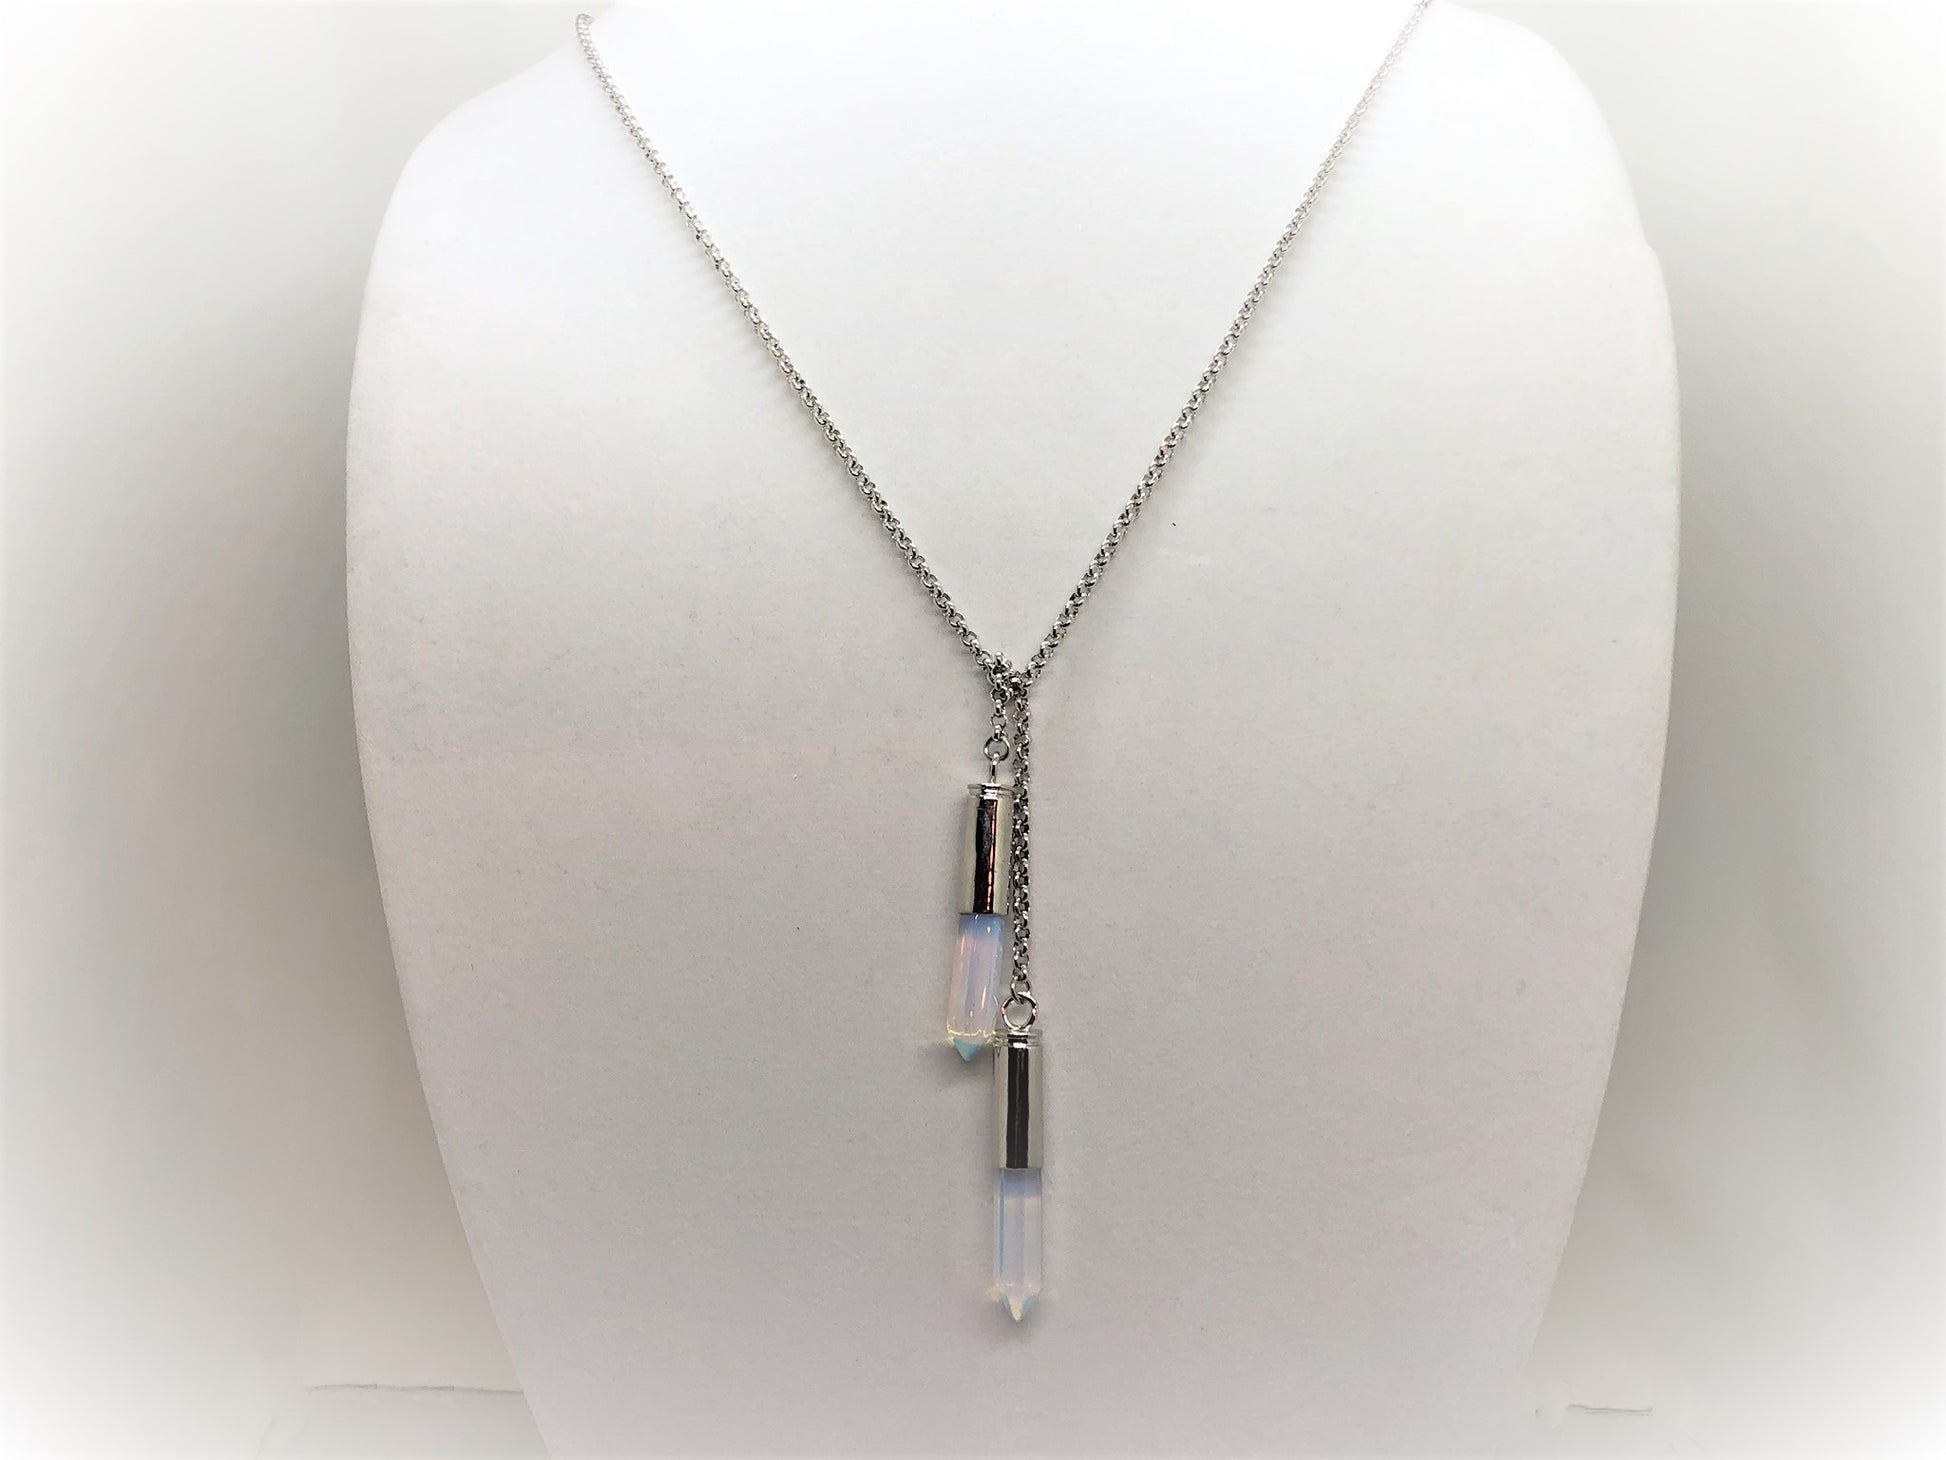 Gemstone Prism Lariat - Emmis Jewelry, Necklace, [product_color]